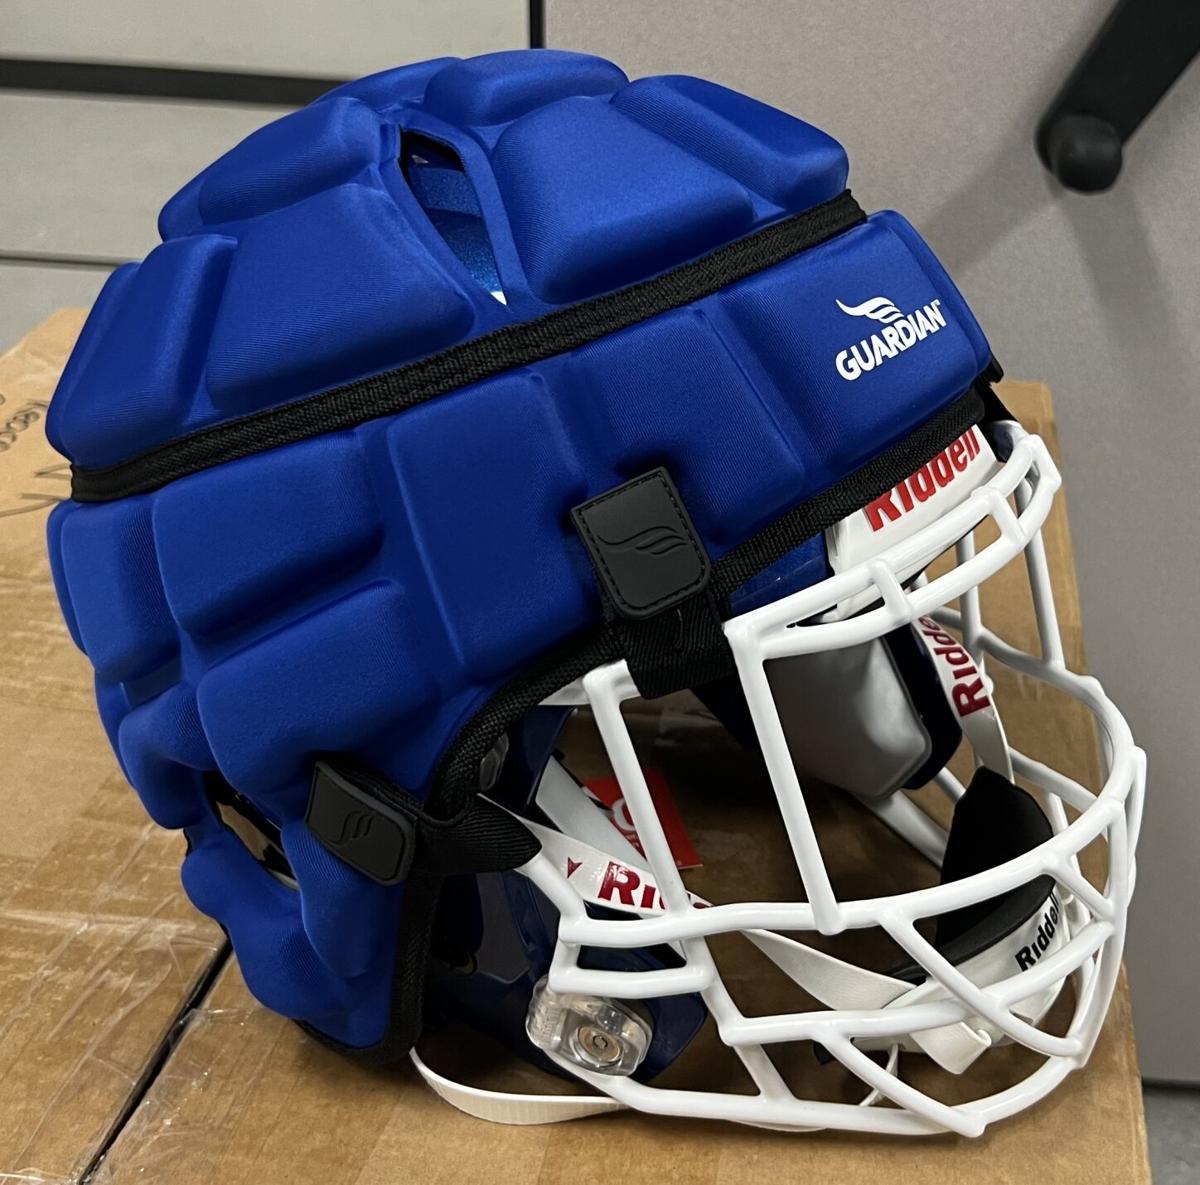 Safety first: Lopers to wear padded caps in practice to prevent